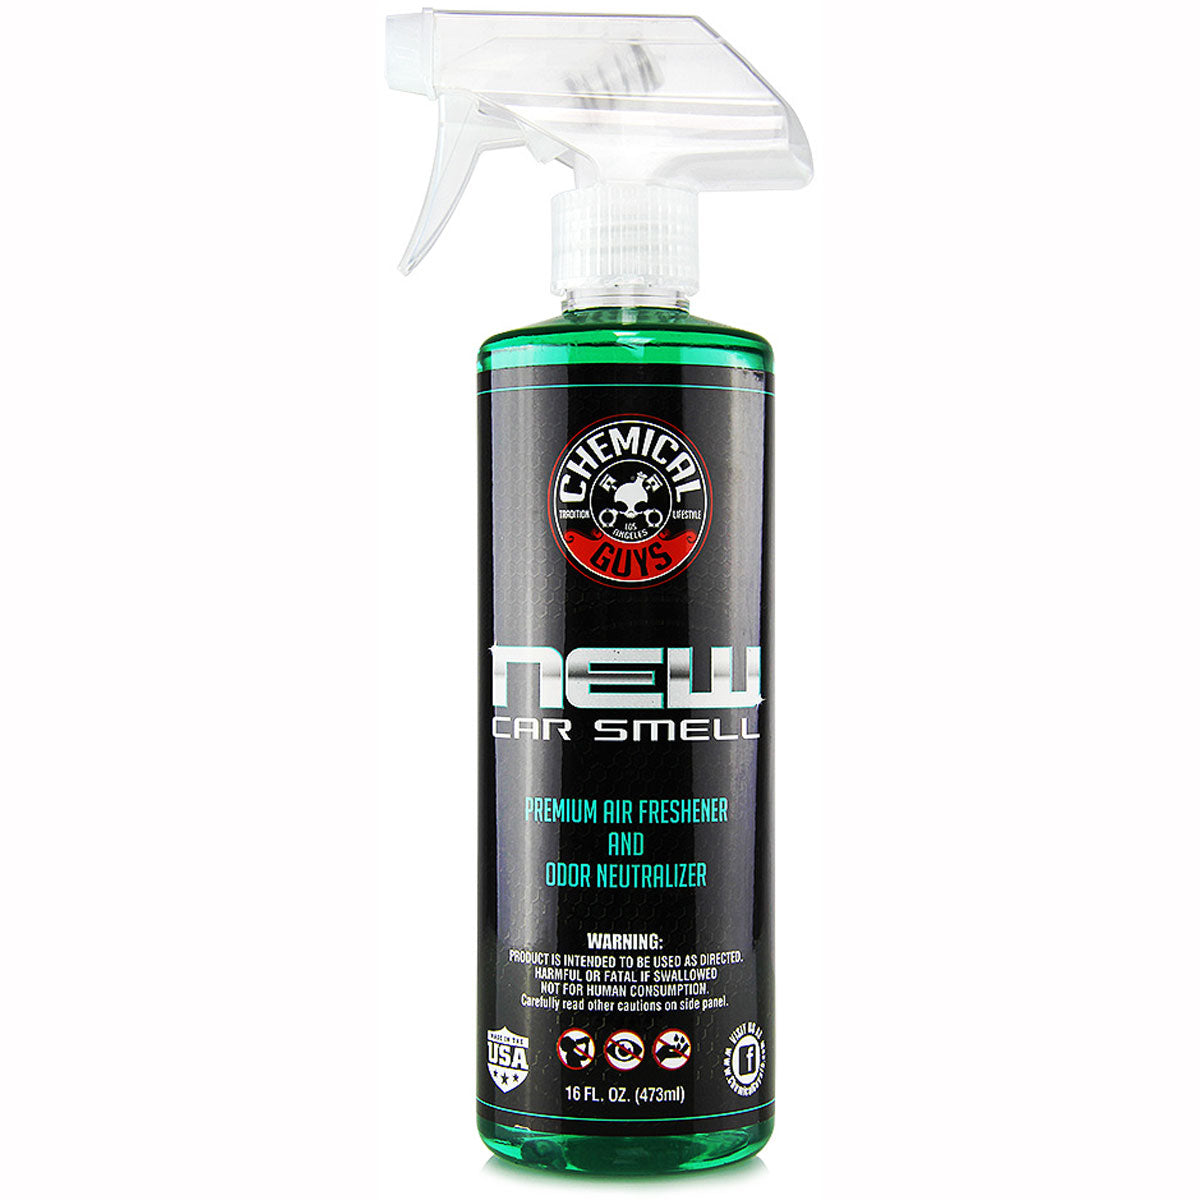 Chemical Guys New Car Smell Premium Air Freshener: Their best-selling car scent